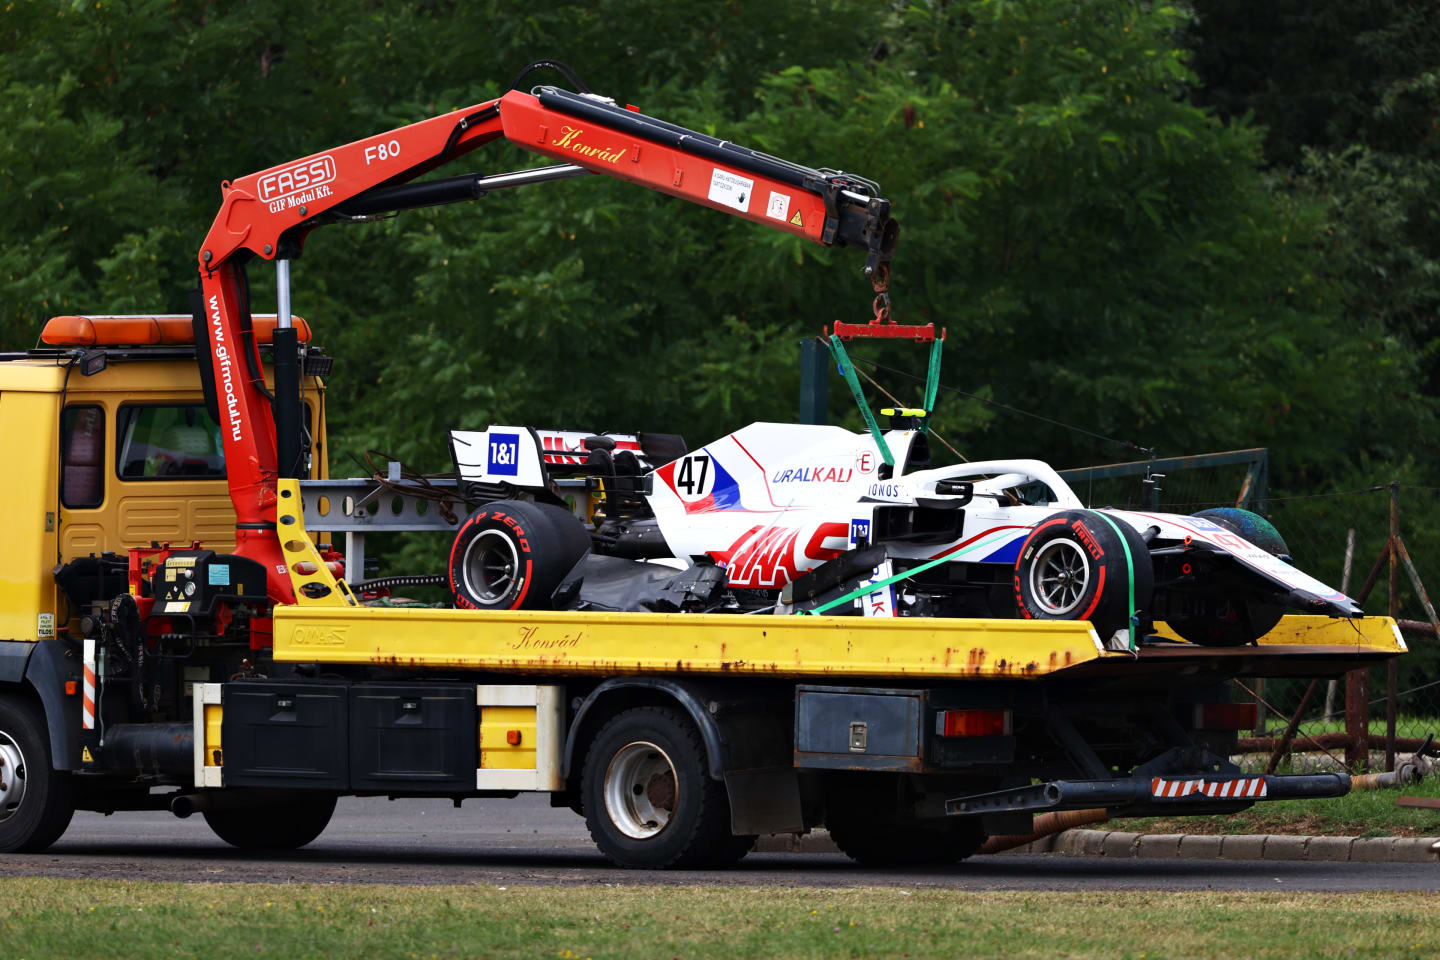 BUDAPEST, HUNGARY - JULY 31: The car of Mick Schumacher of Germany and Haas F1 is removed from the track after a crash during final practice ahead of the F1 Grand Prix of Hungary at Hungaroring on July 31, 2021 in Budapest, Hungary. (Photo by Bryn Lennon/Getty Images)